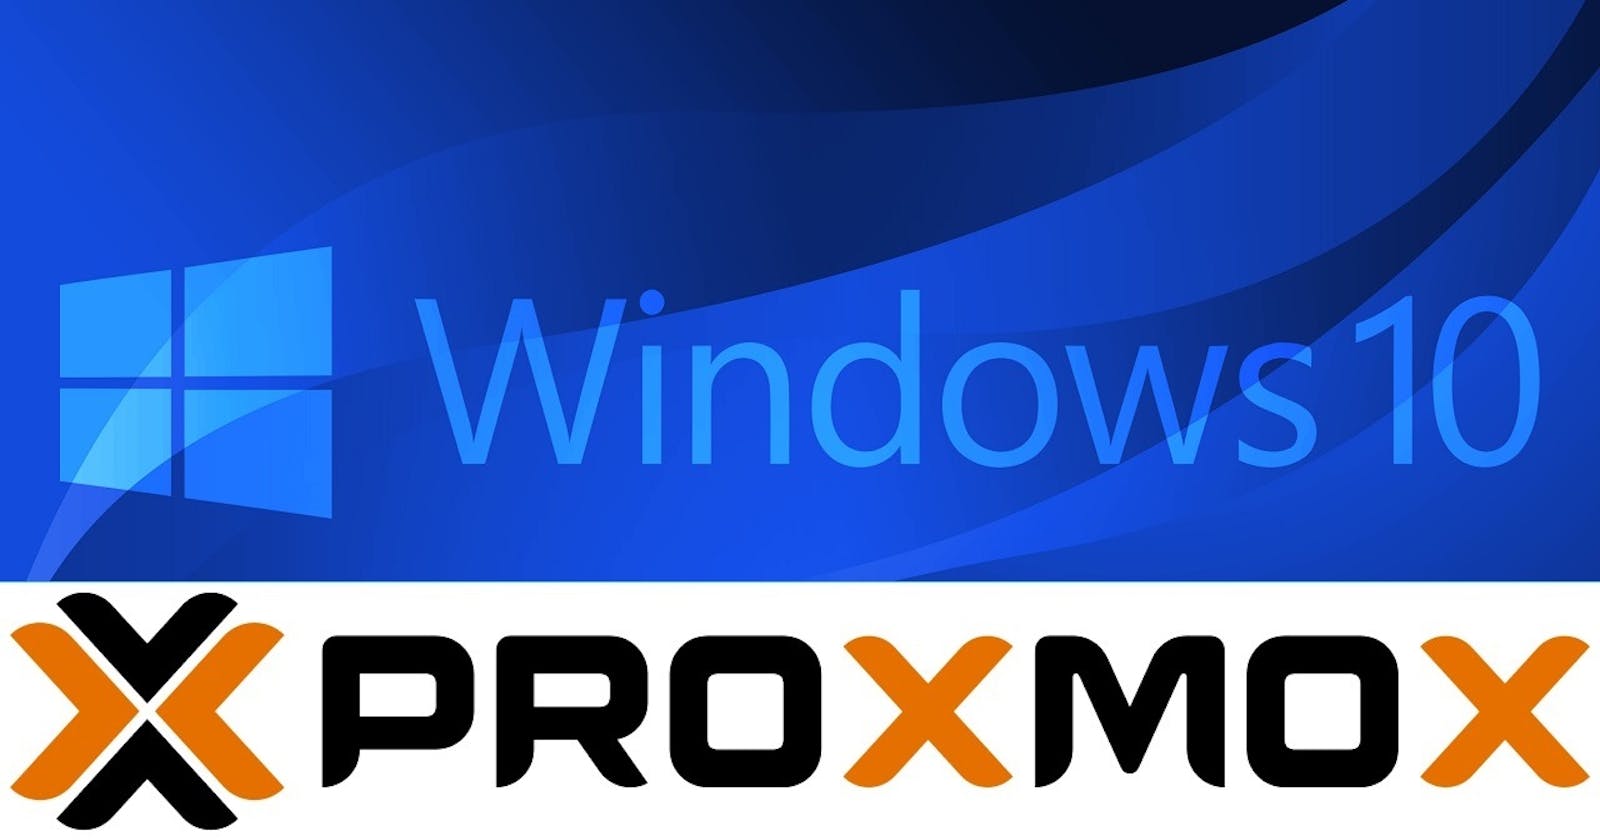 HowTo install & configure Windows 10 in a VM on Proxmox VE 7.1 - step-by-step